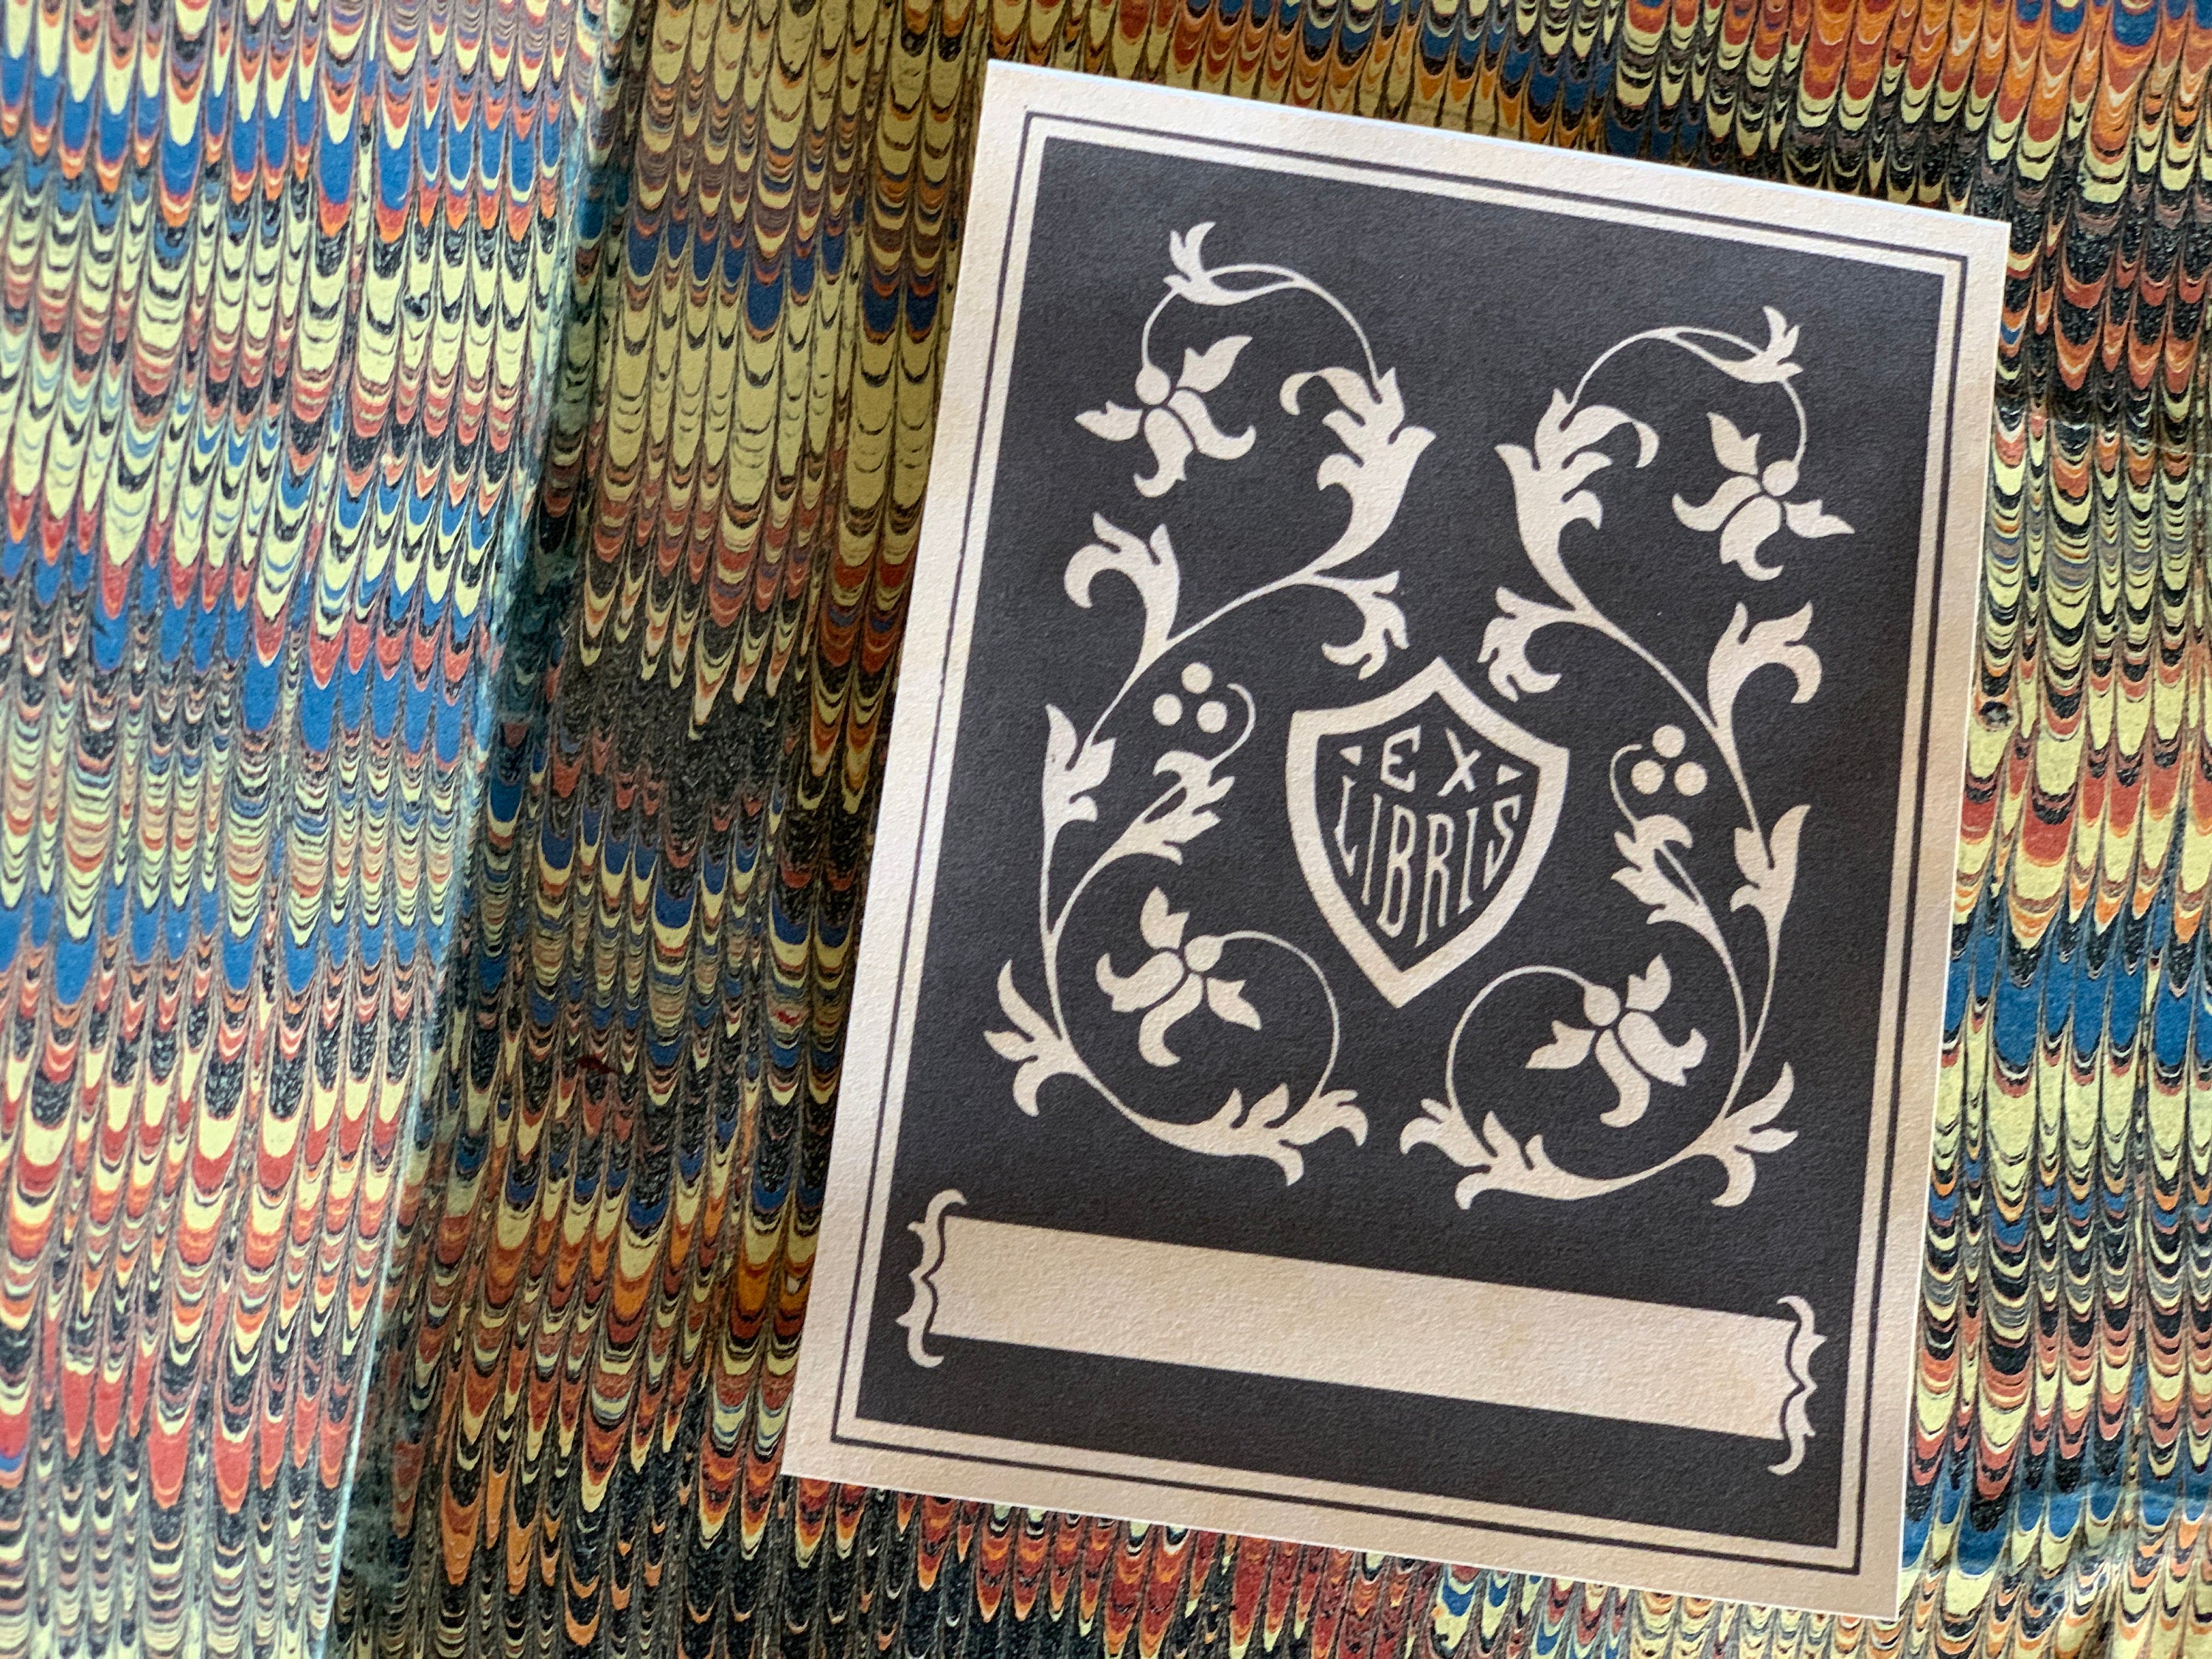 Floral Shield, Personalized Ex-Libris Bookplates, Crafted on Traditional Gummed Paper, 3in x 4in, Set of 30